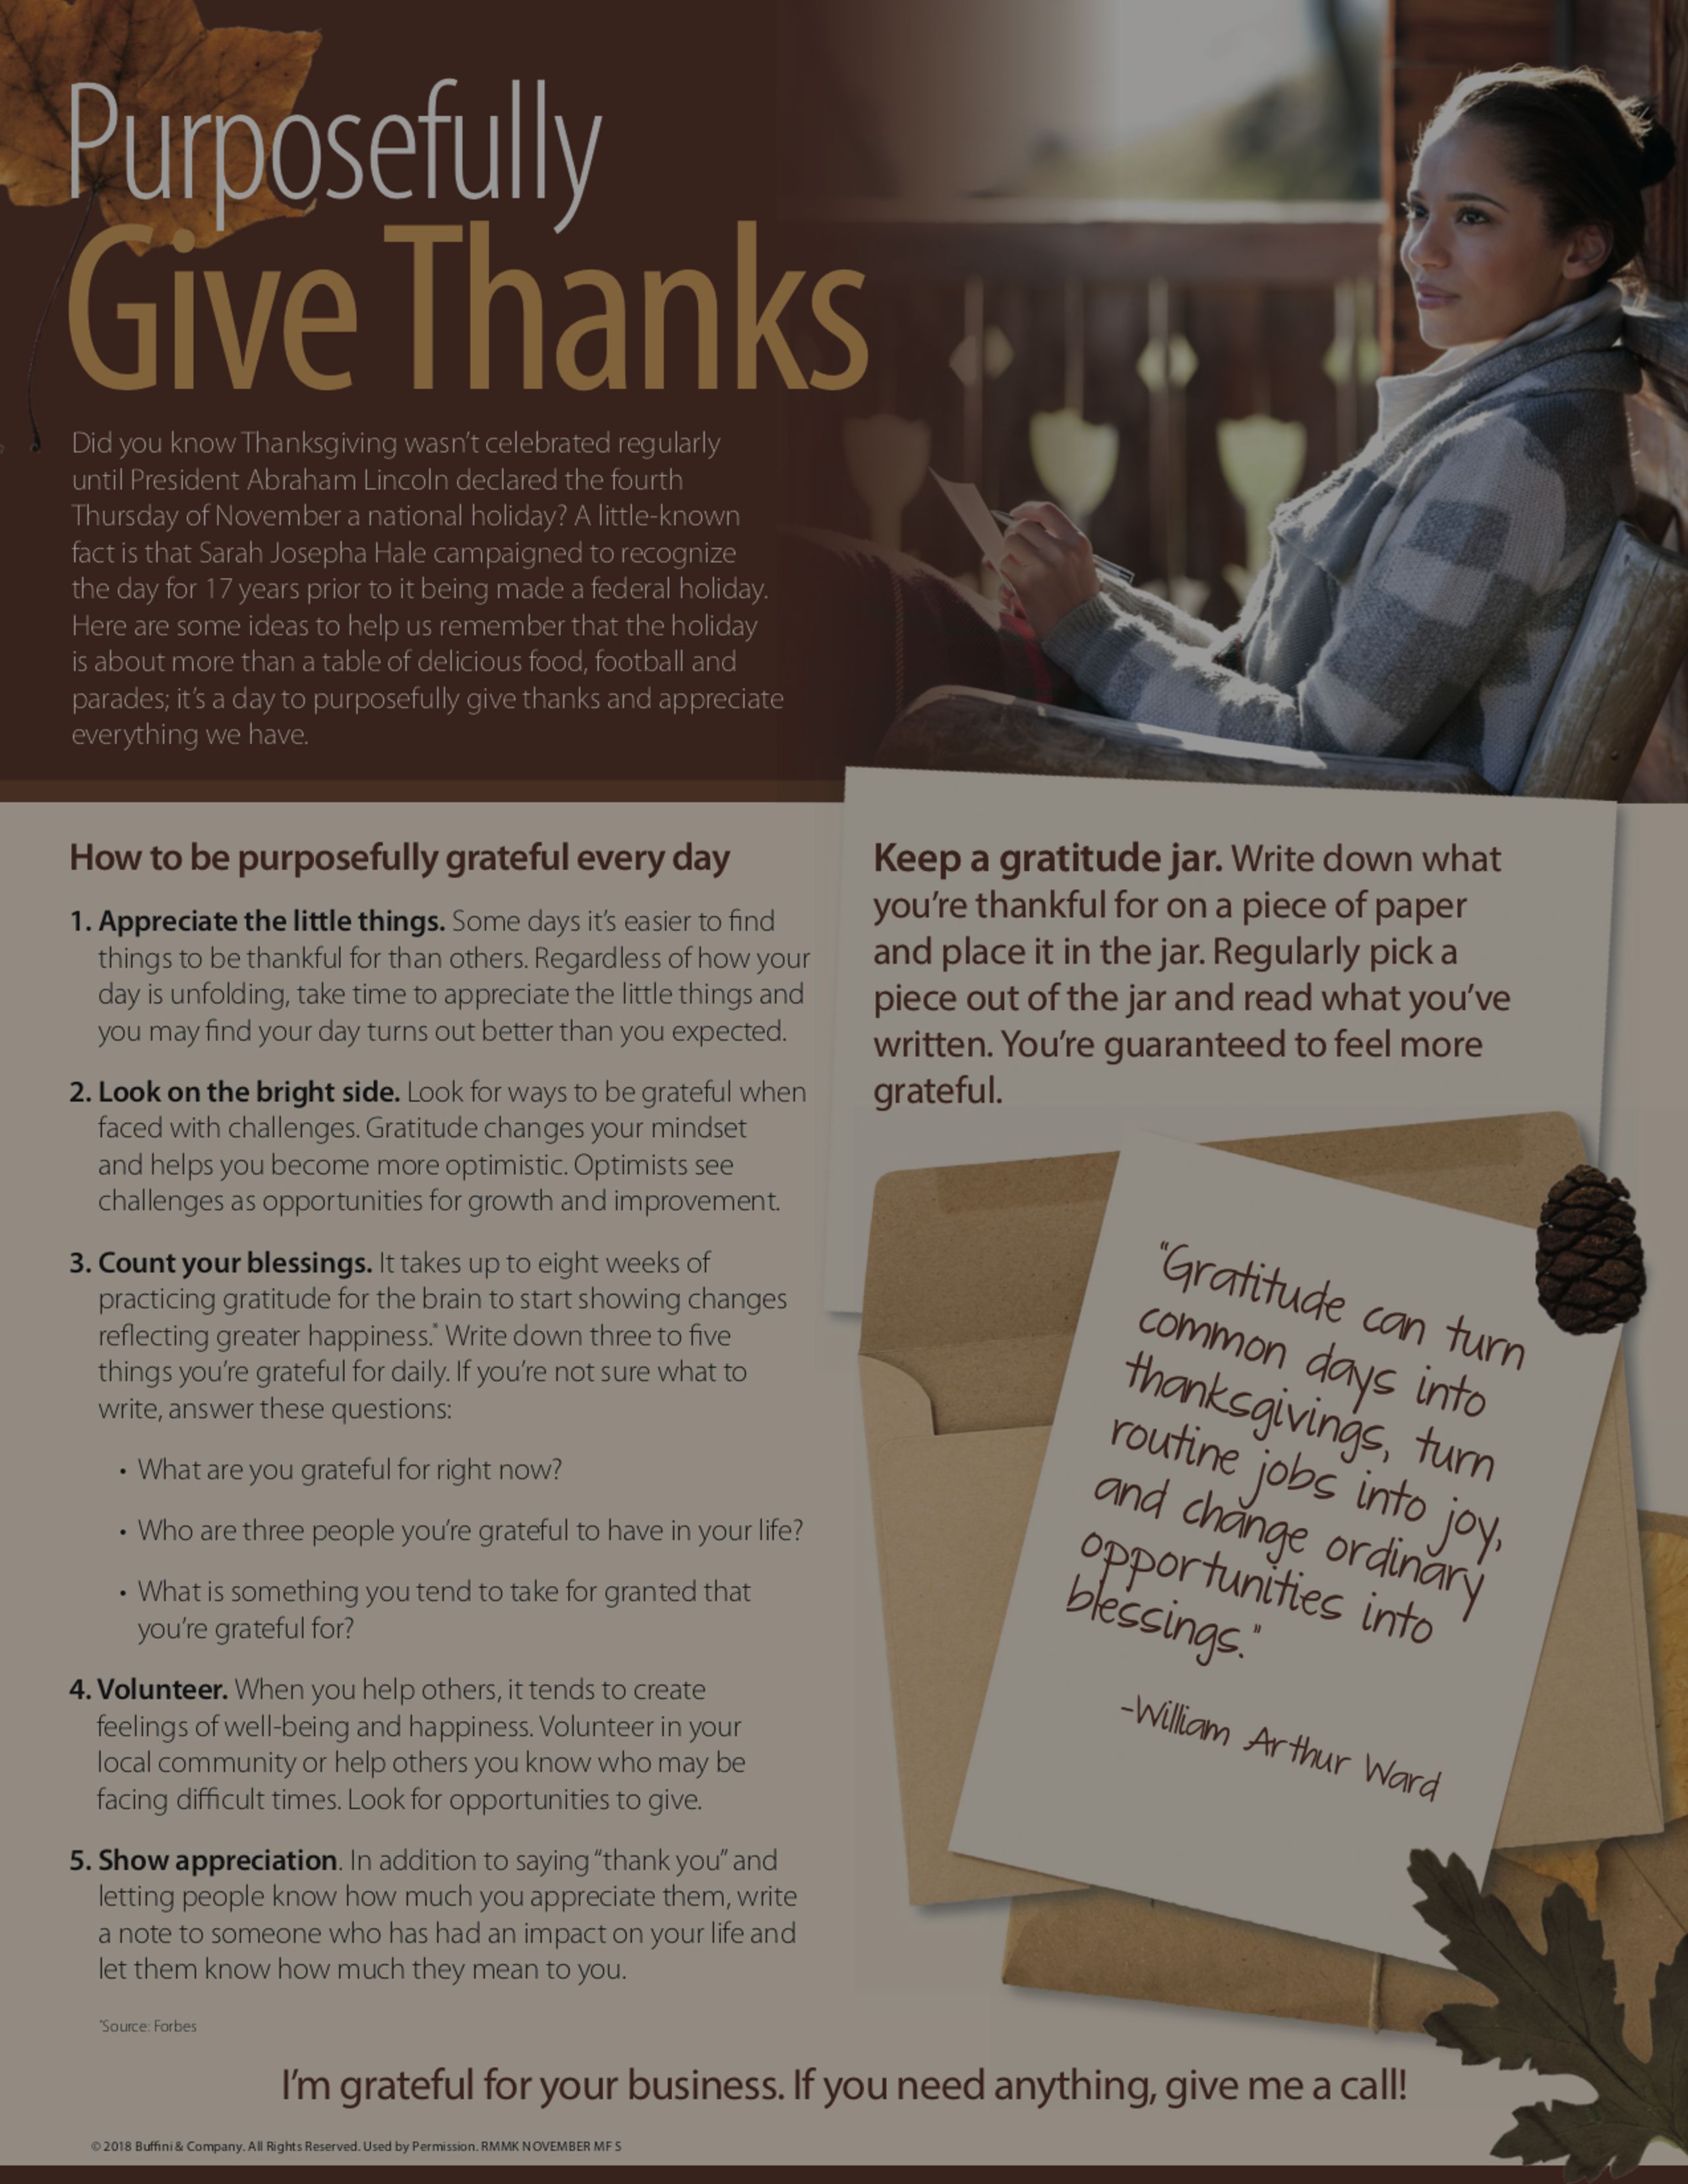 Purposefully Give Thanks